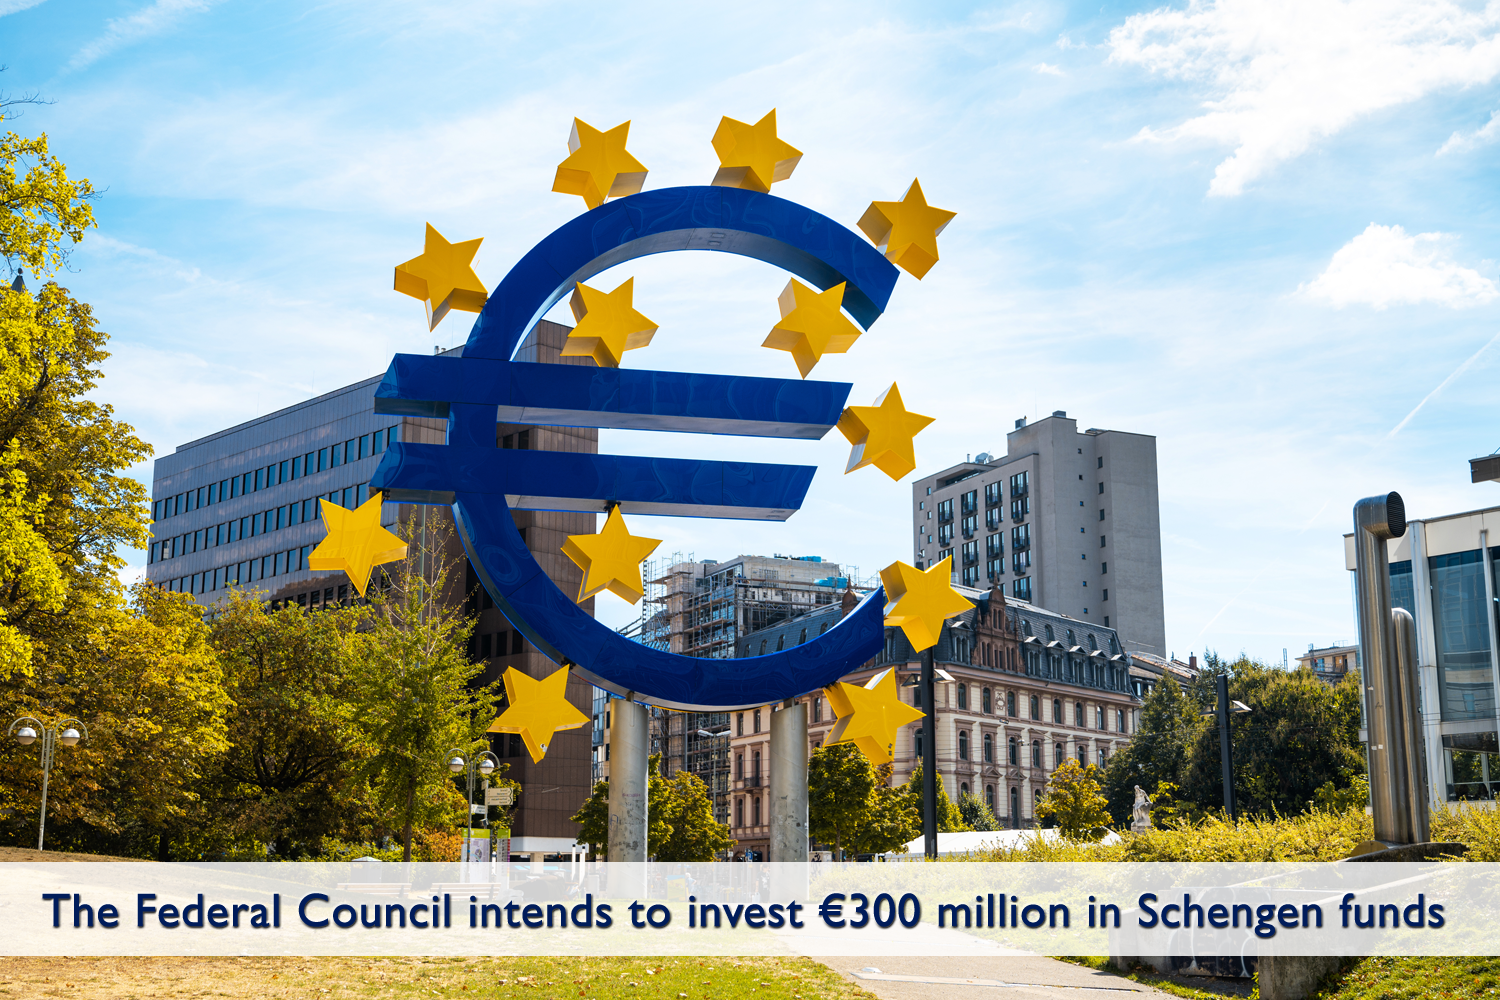 The Federal Council intends to invest €300 million in Schengen funds.